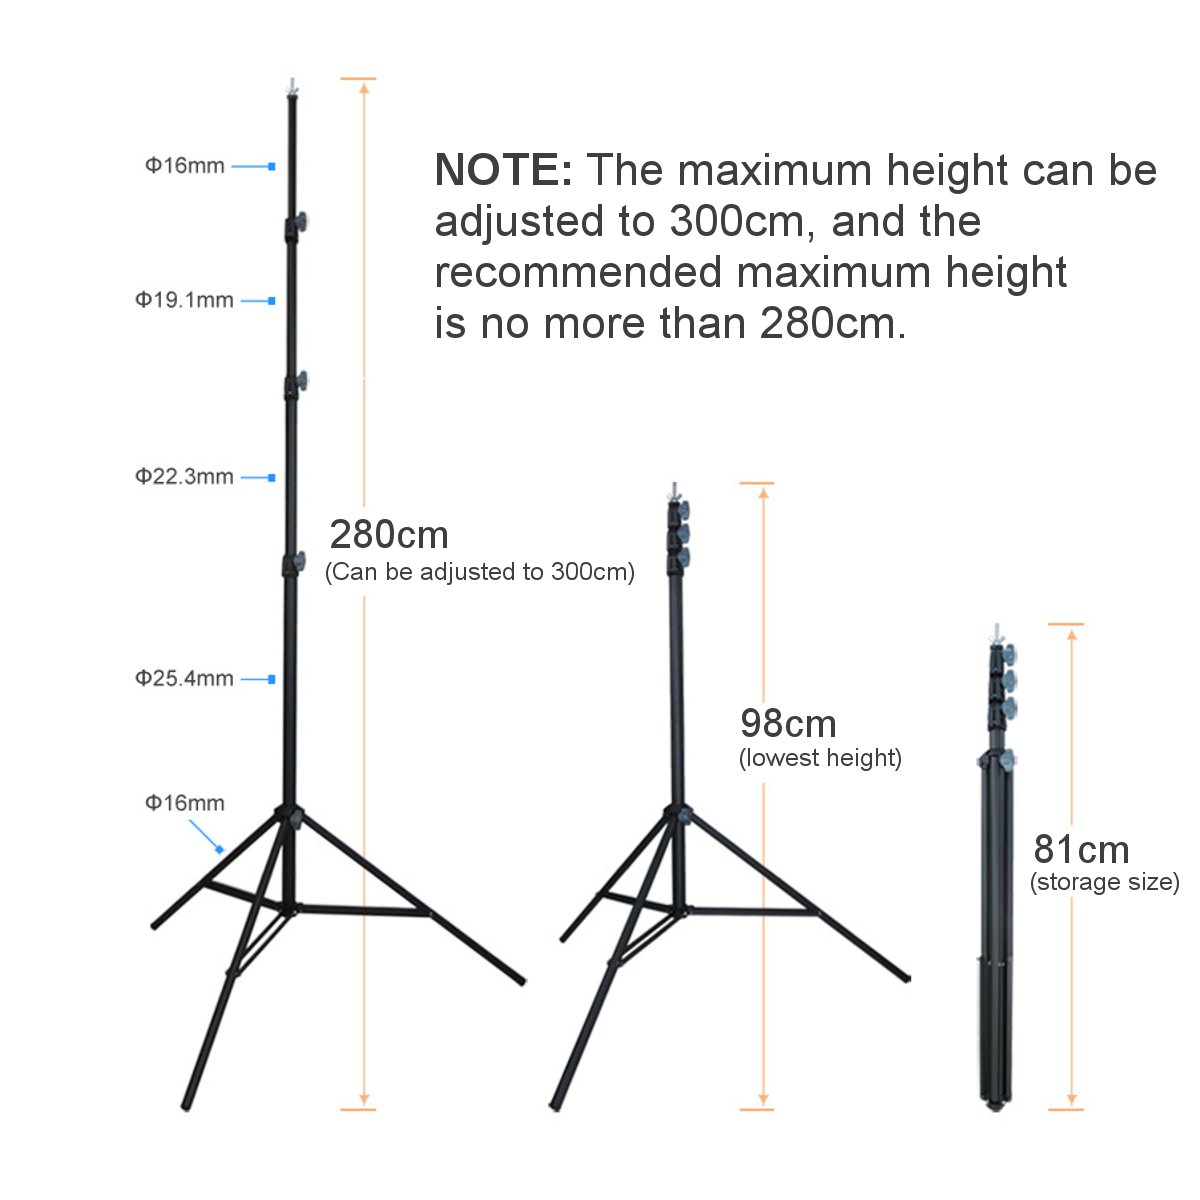 3x28m-Adjustable-Foldable-Photography-Background-Stand-Tripod-Support-Portable-Studio-Backdrop-Kits-1600733